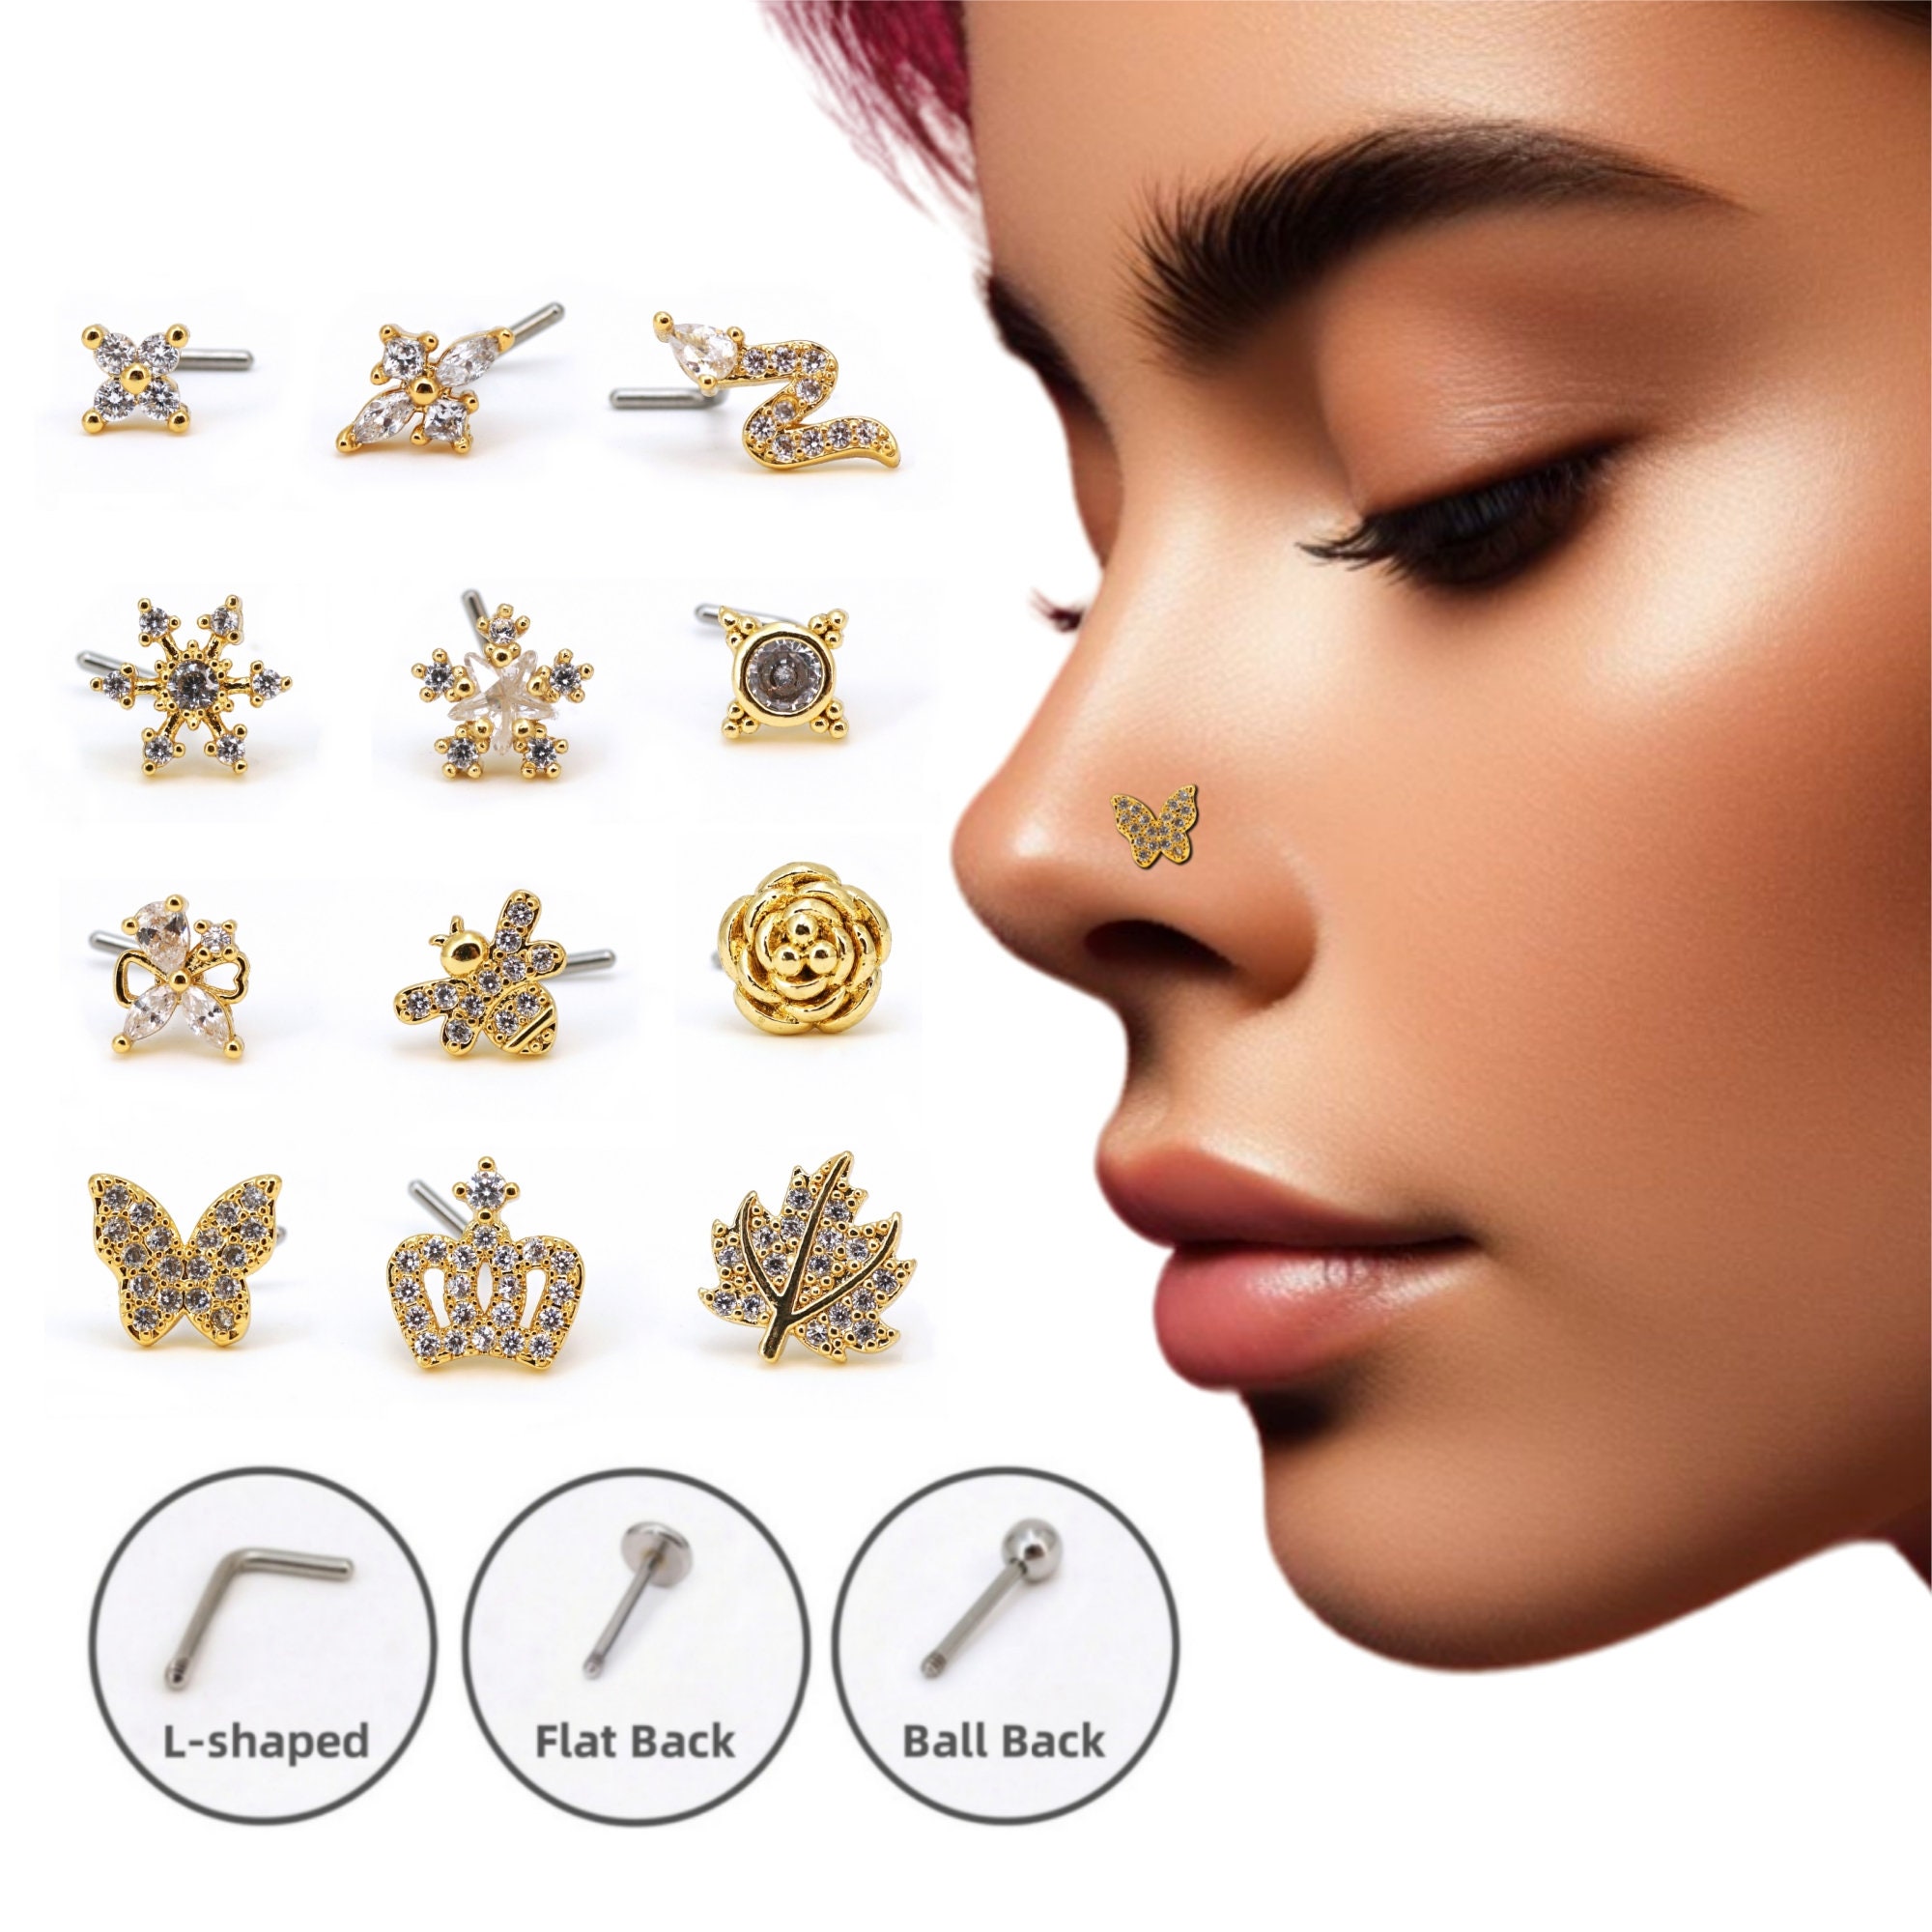 Buy Nose Ring Endless Crescent Moon - Choose Your Metal, Choose Your Size  Online | Mystic Moon Shop